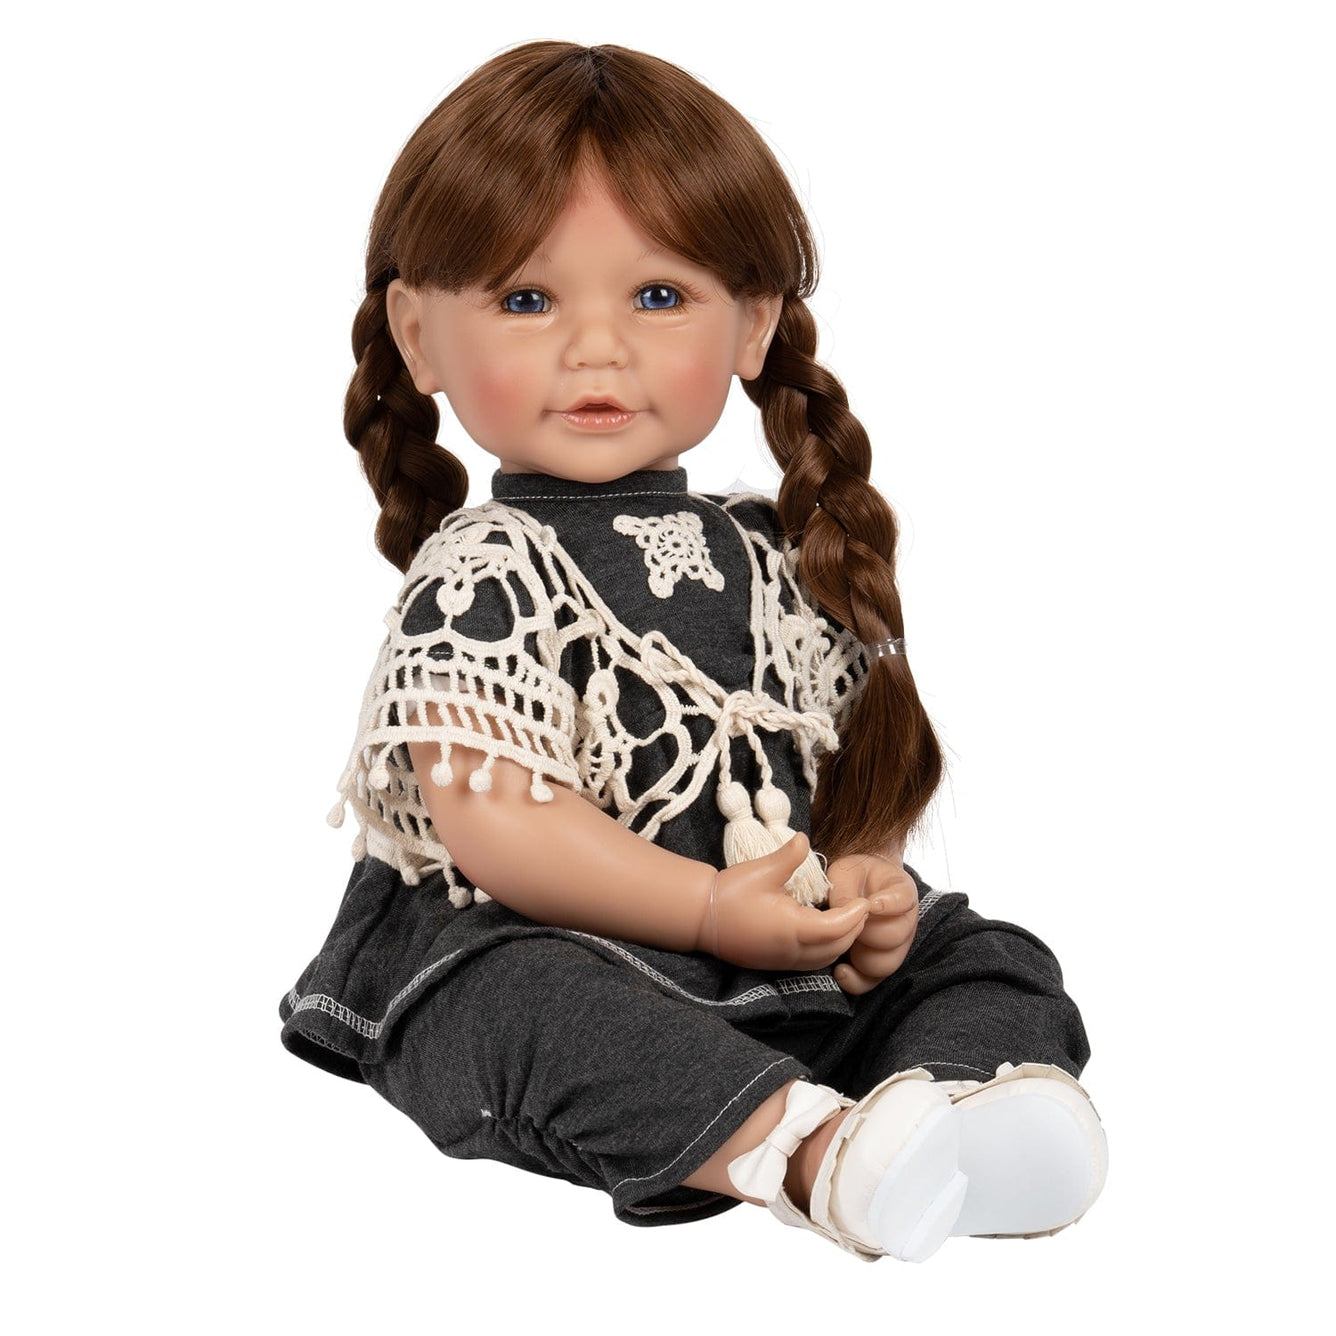 Adora Realistic Toddler Baby Doll Lace, Lace Baby - 20 inches